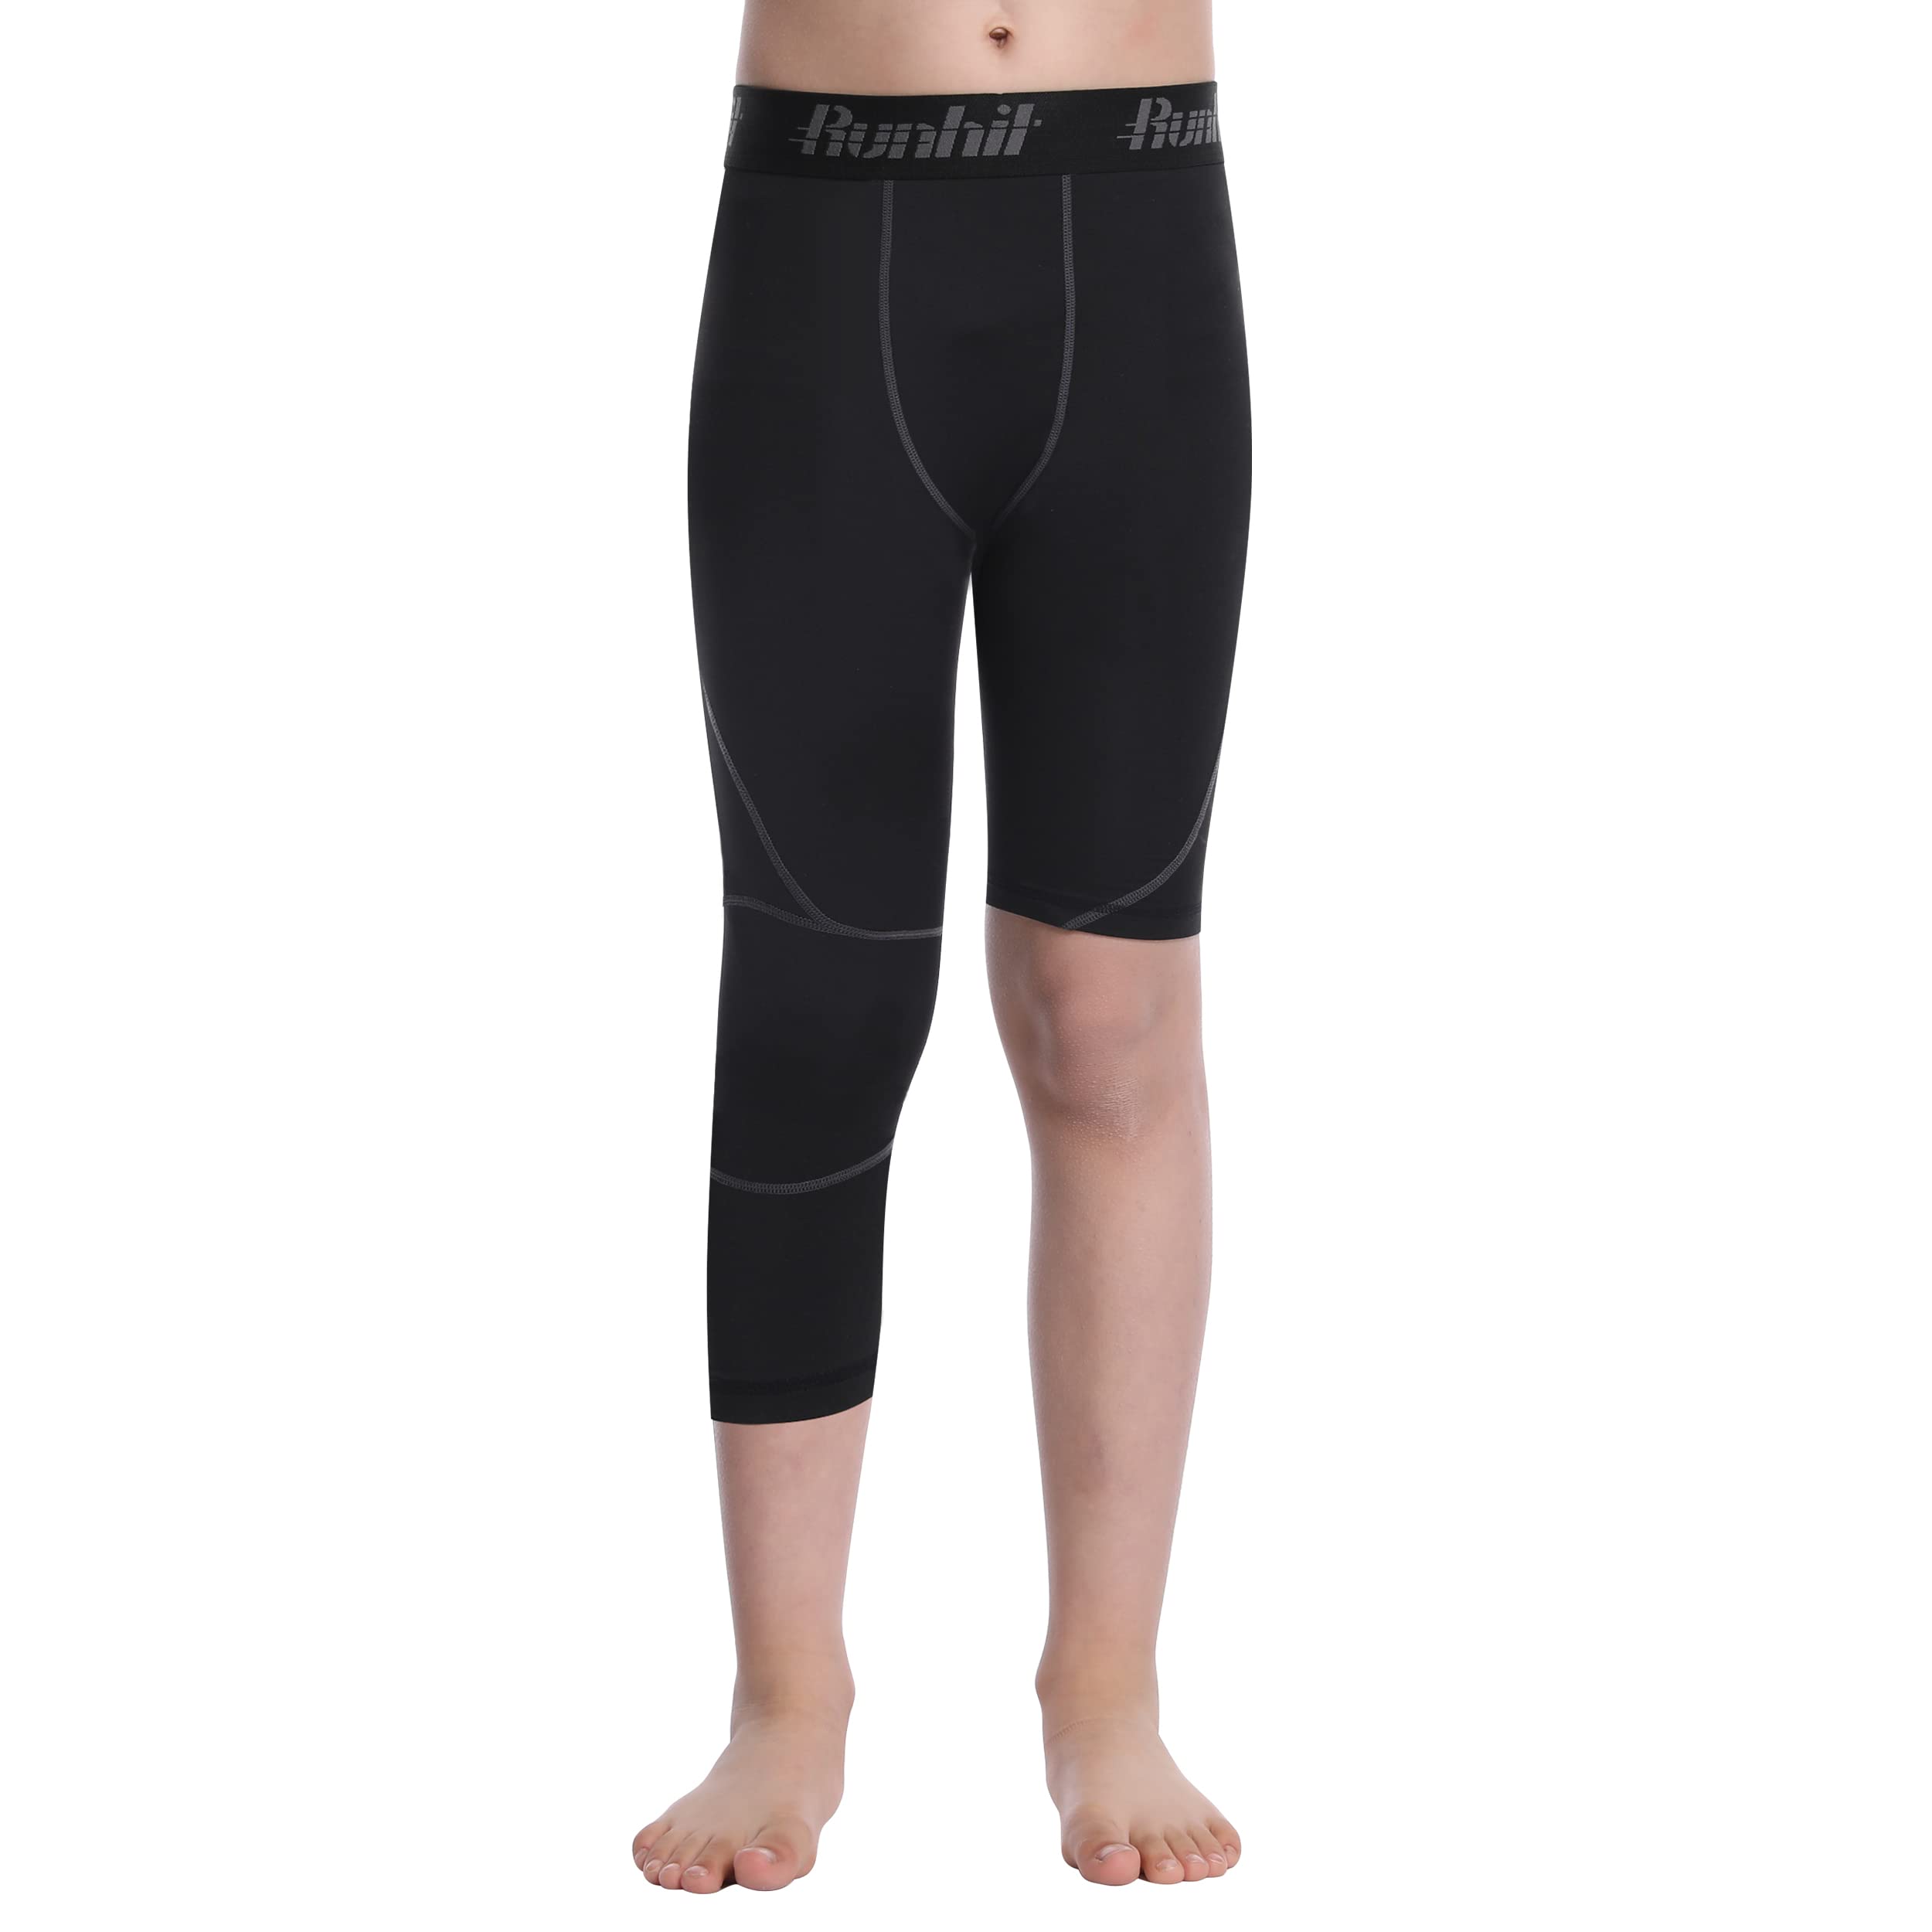 High Stretch Mens Leggings For Training, Fitness, Paintball, Basketball  Bike Knee Pads Pants With 3/4 Compression Pads Q0913 From Yanqin10, $11.94  | DHgate.Com